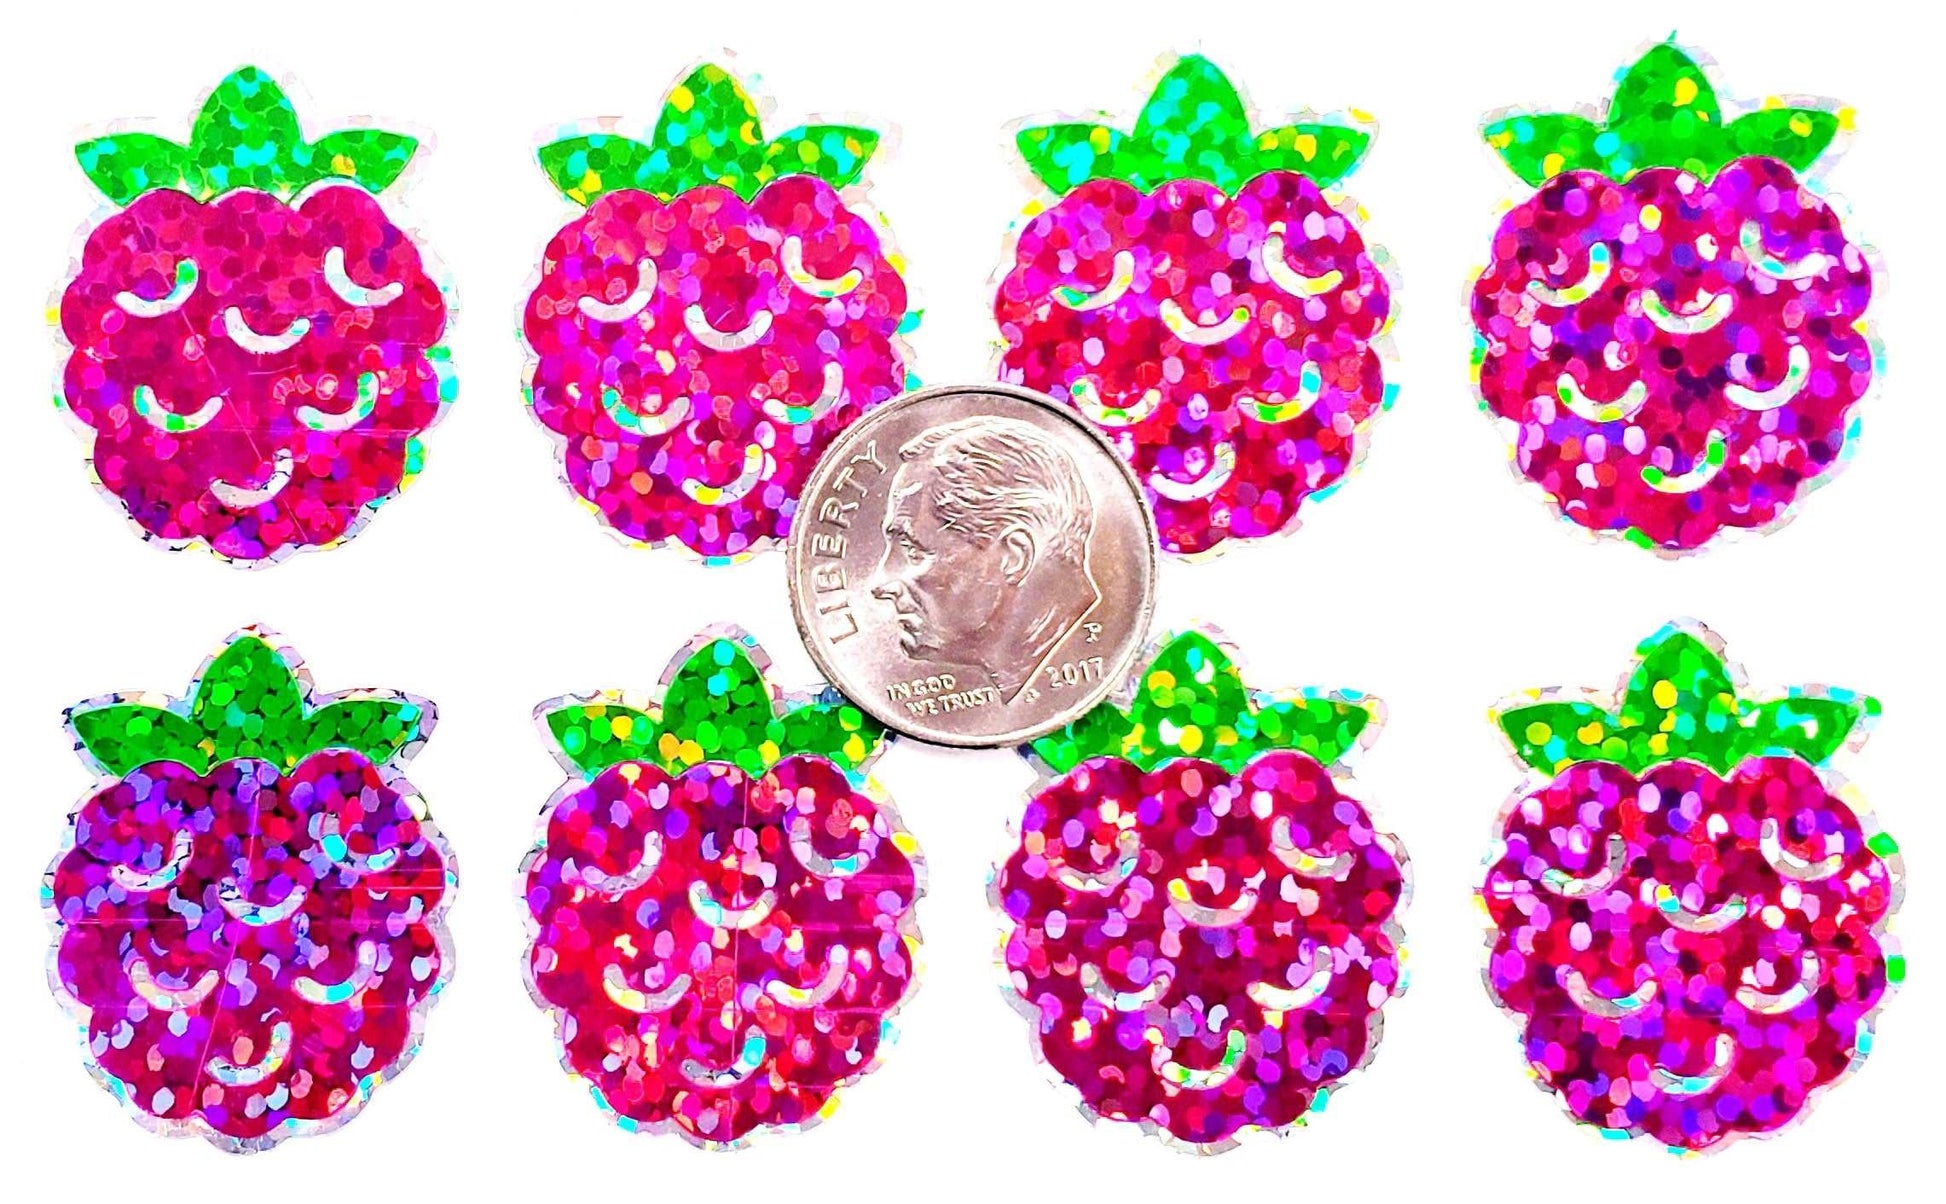 Raspberry Stickers, set of 12 or 24 pink and green summer fruit stickers for envelopes, cards, notebooks, drink cups and craft projects.